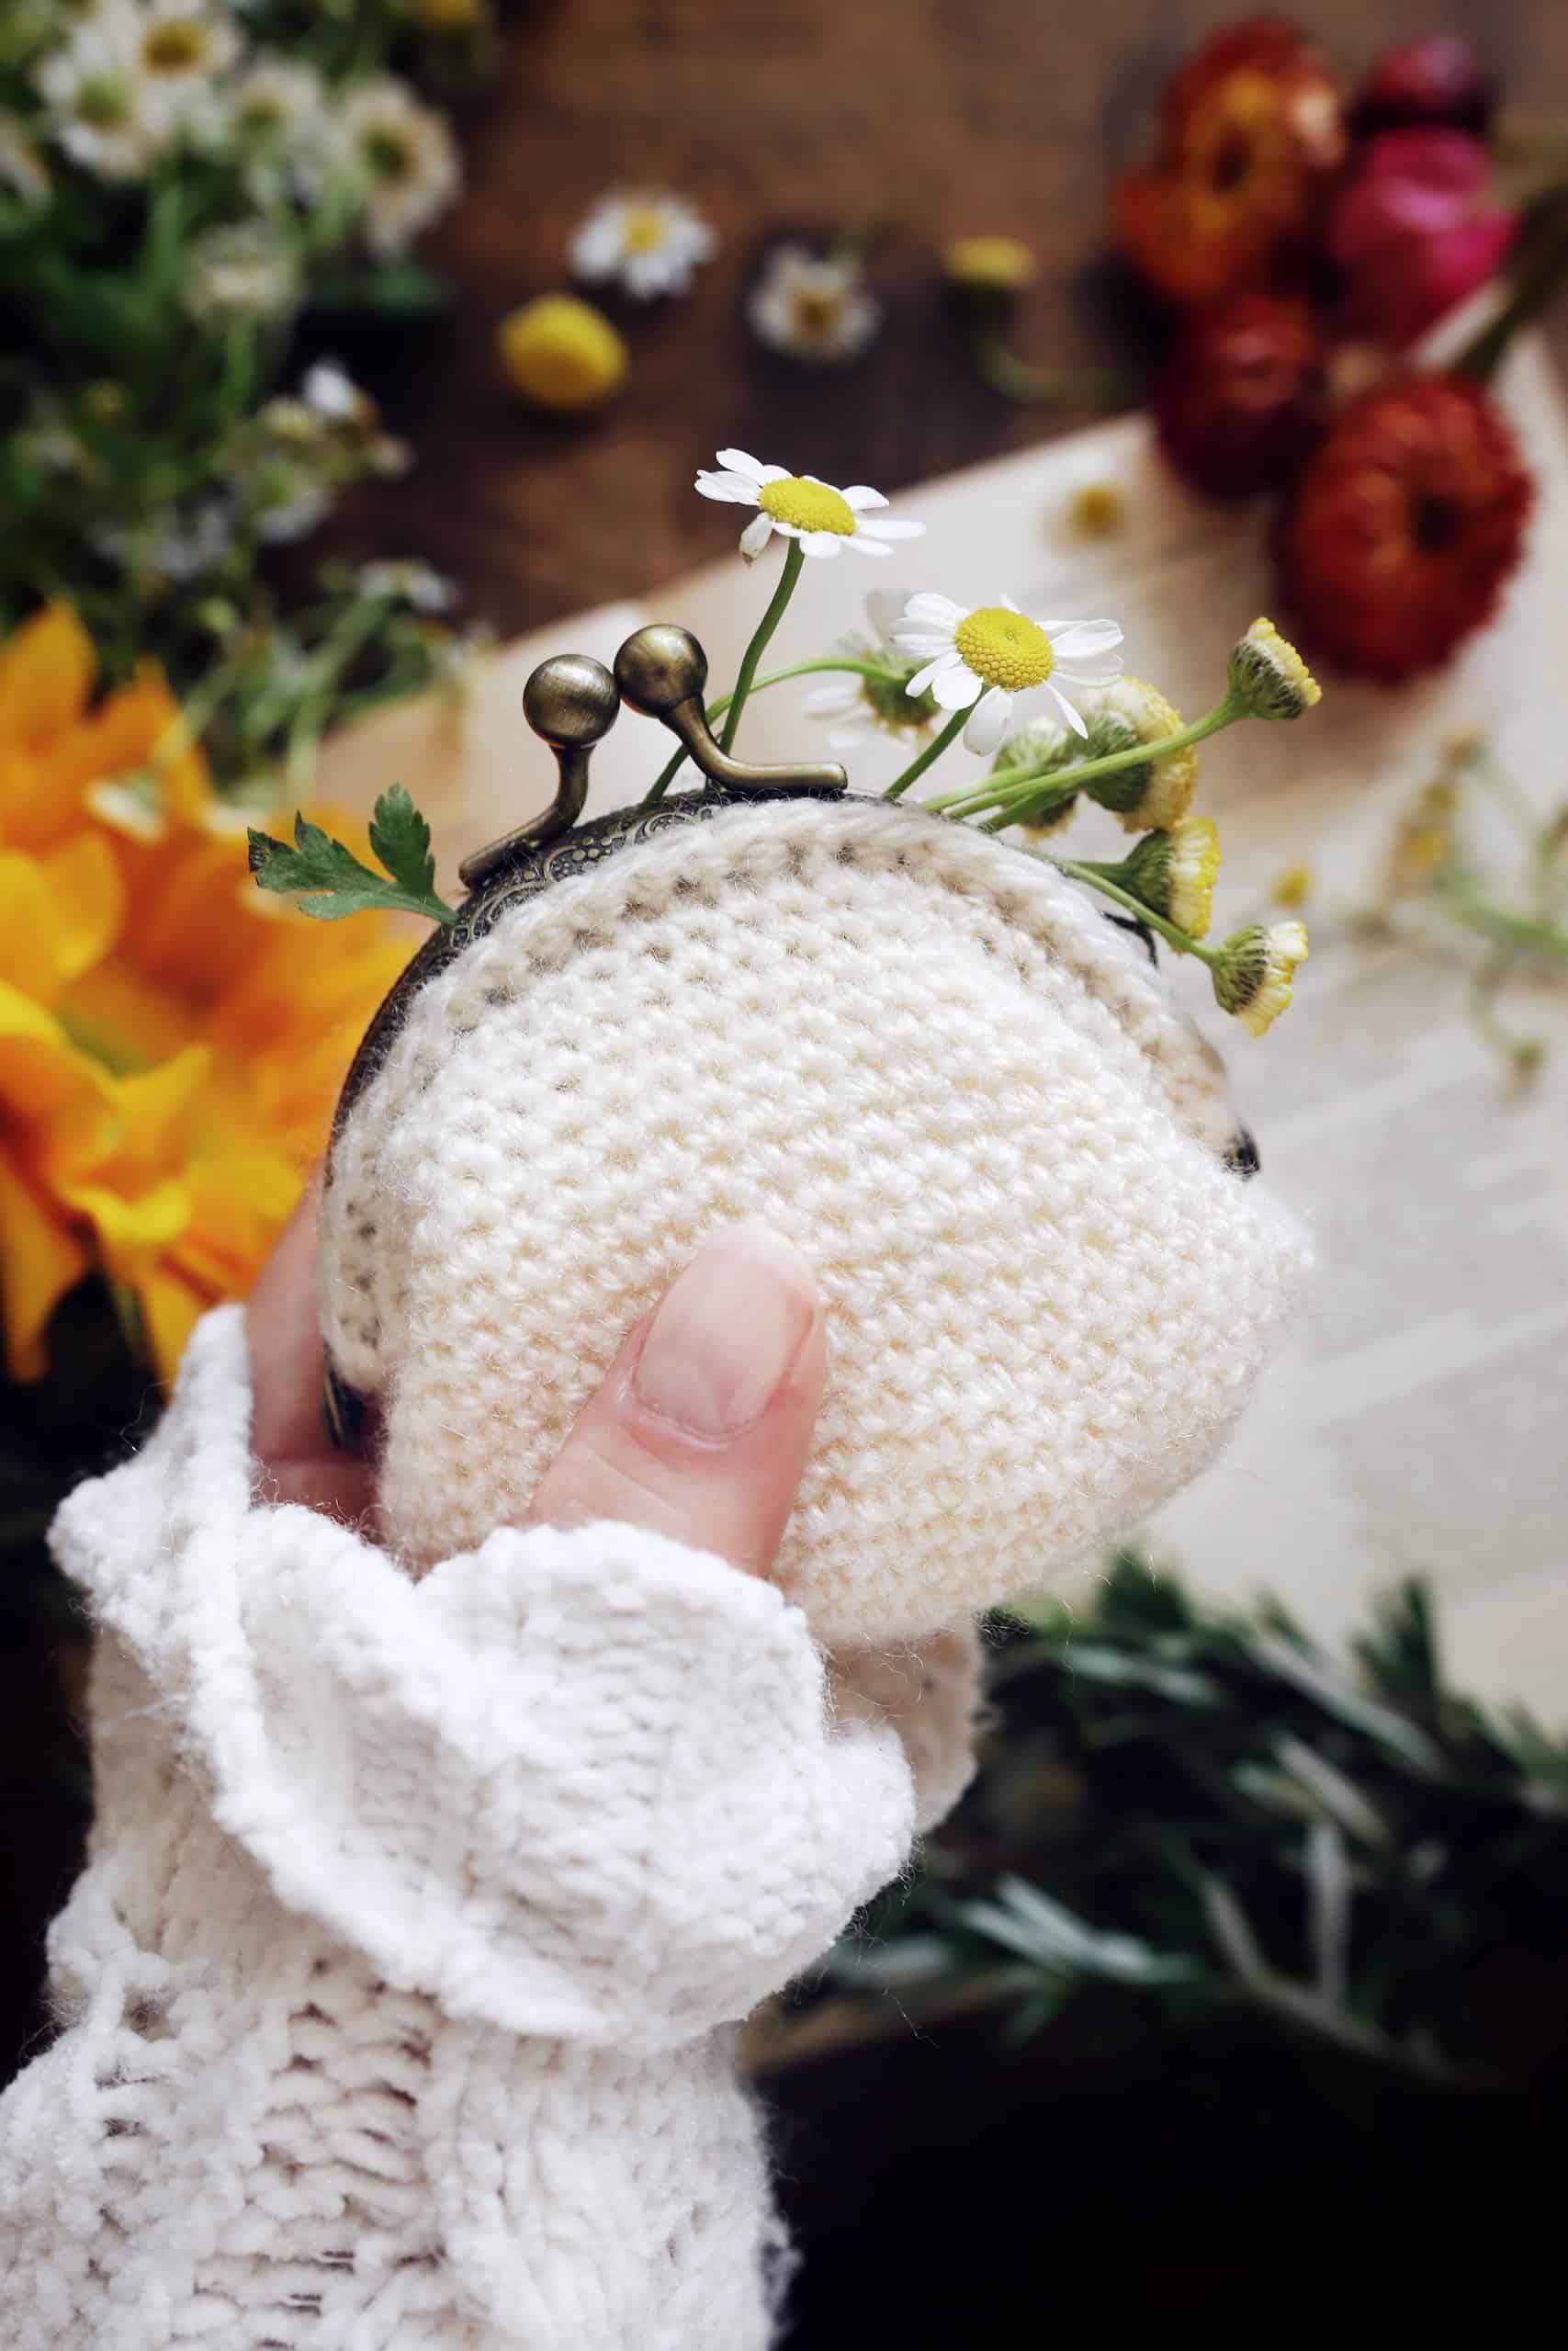 Handmade Wool Knit Crochet Frog Purse Bucket Shoulder Bag Cute Christmas  Gift For Kids Tree Man Deer Messenger Bag With Accessories From  Starbright777, $8.2 | DHgate.Com